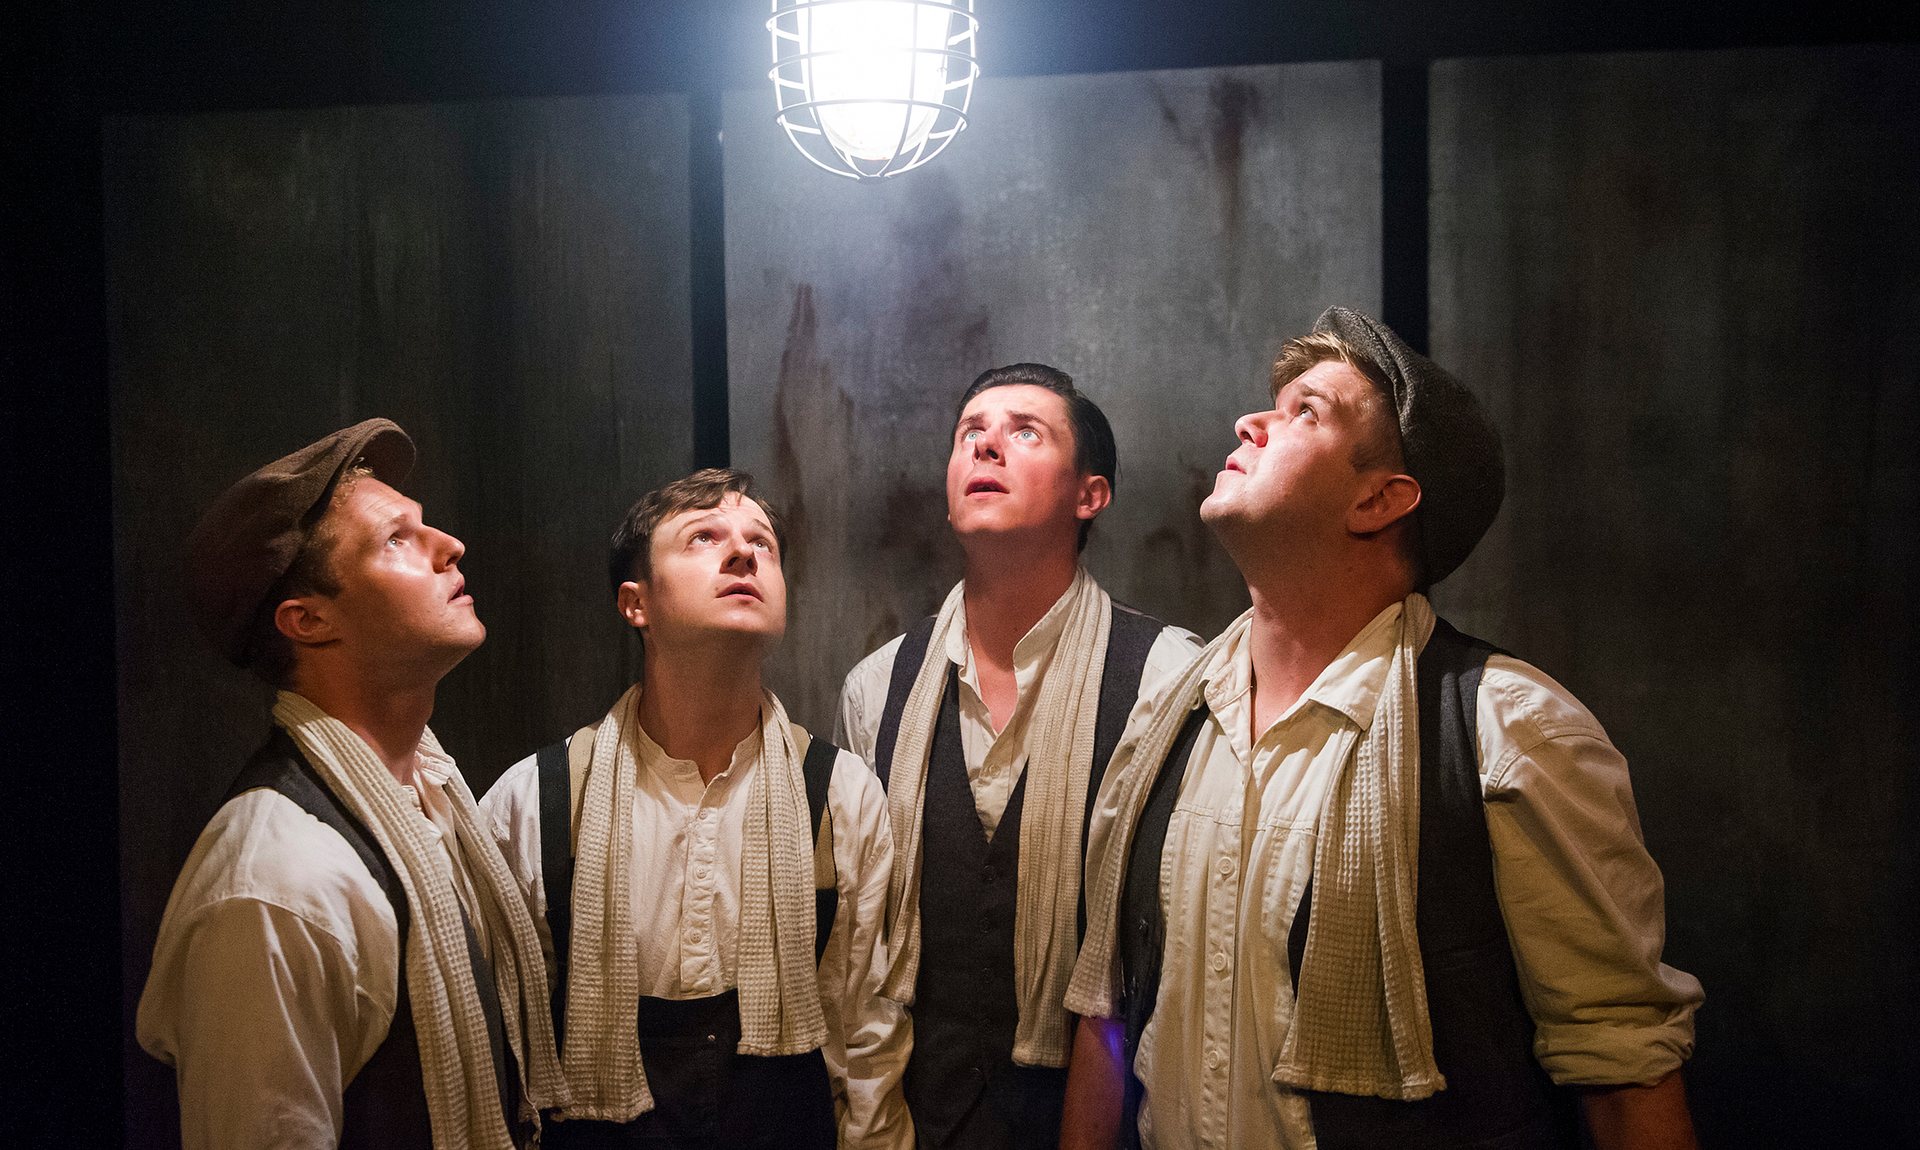 The cast of Operation Crucible: Paul Tinto (Phil), Salvatore D’Aquilla (Bob), James Wallwork (Arthur), and Kieran Knowles (Tommy).